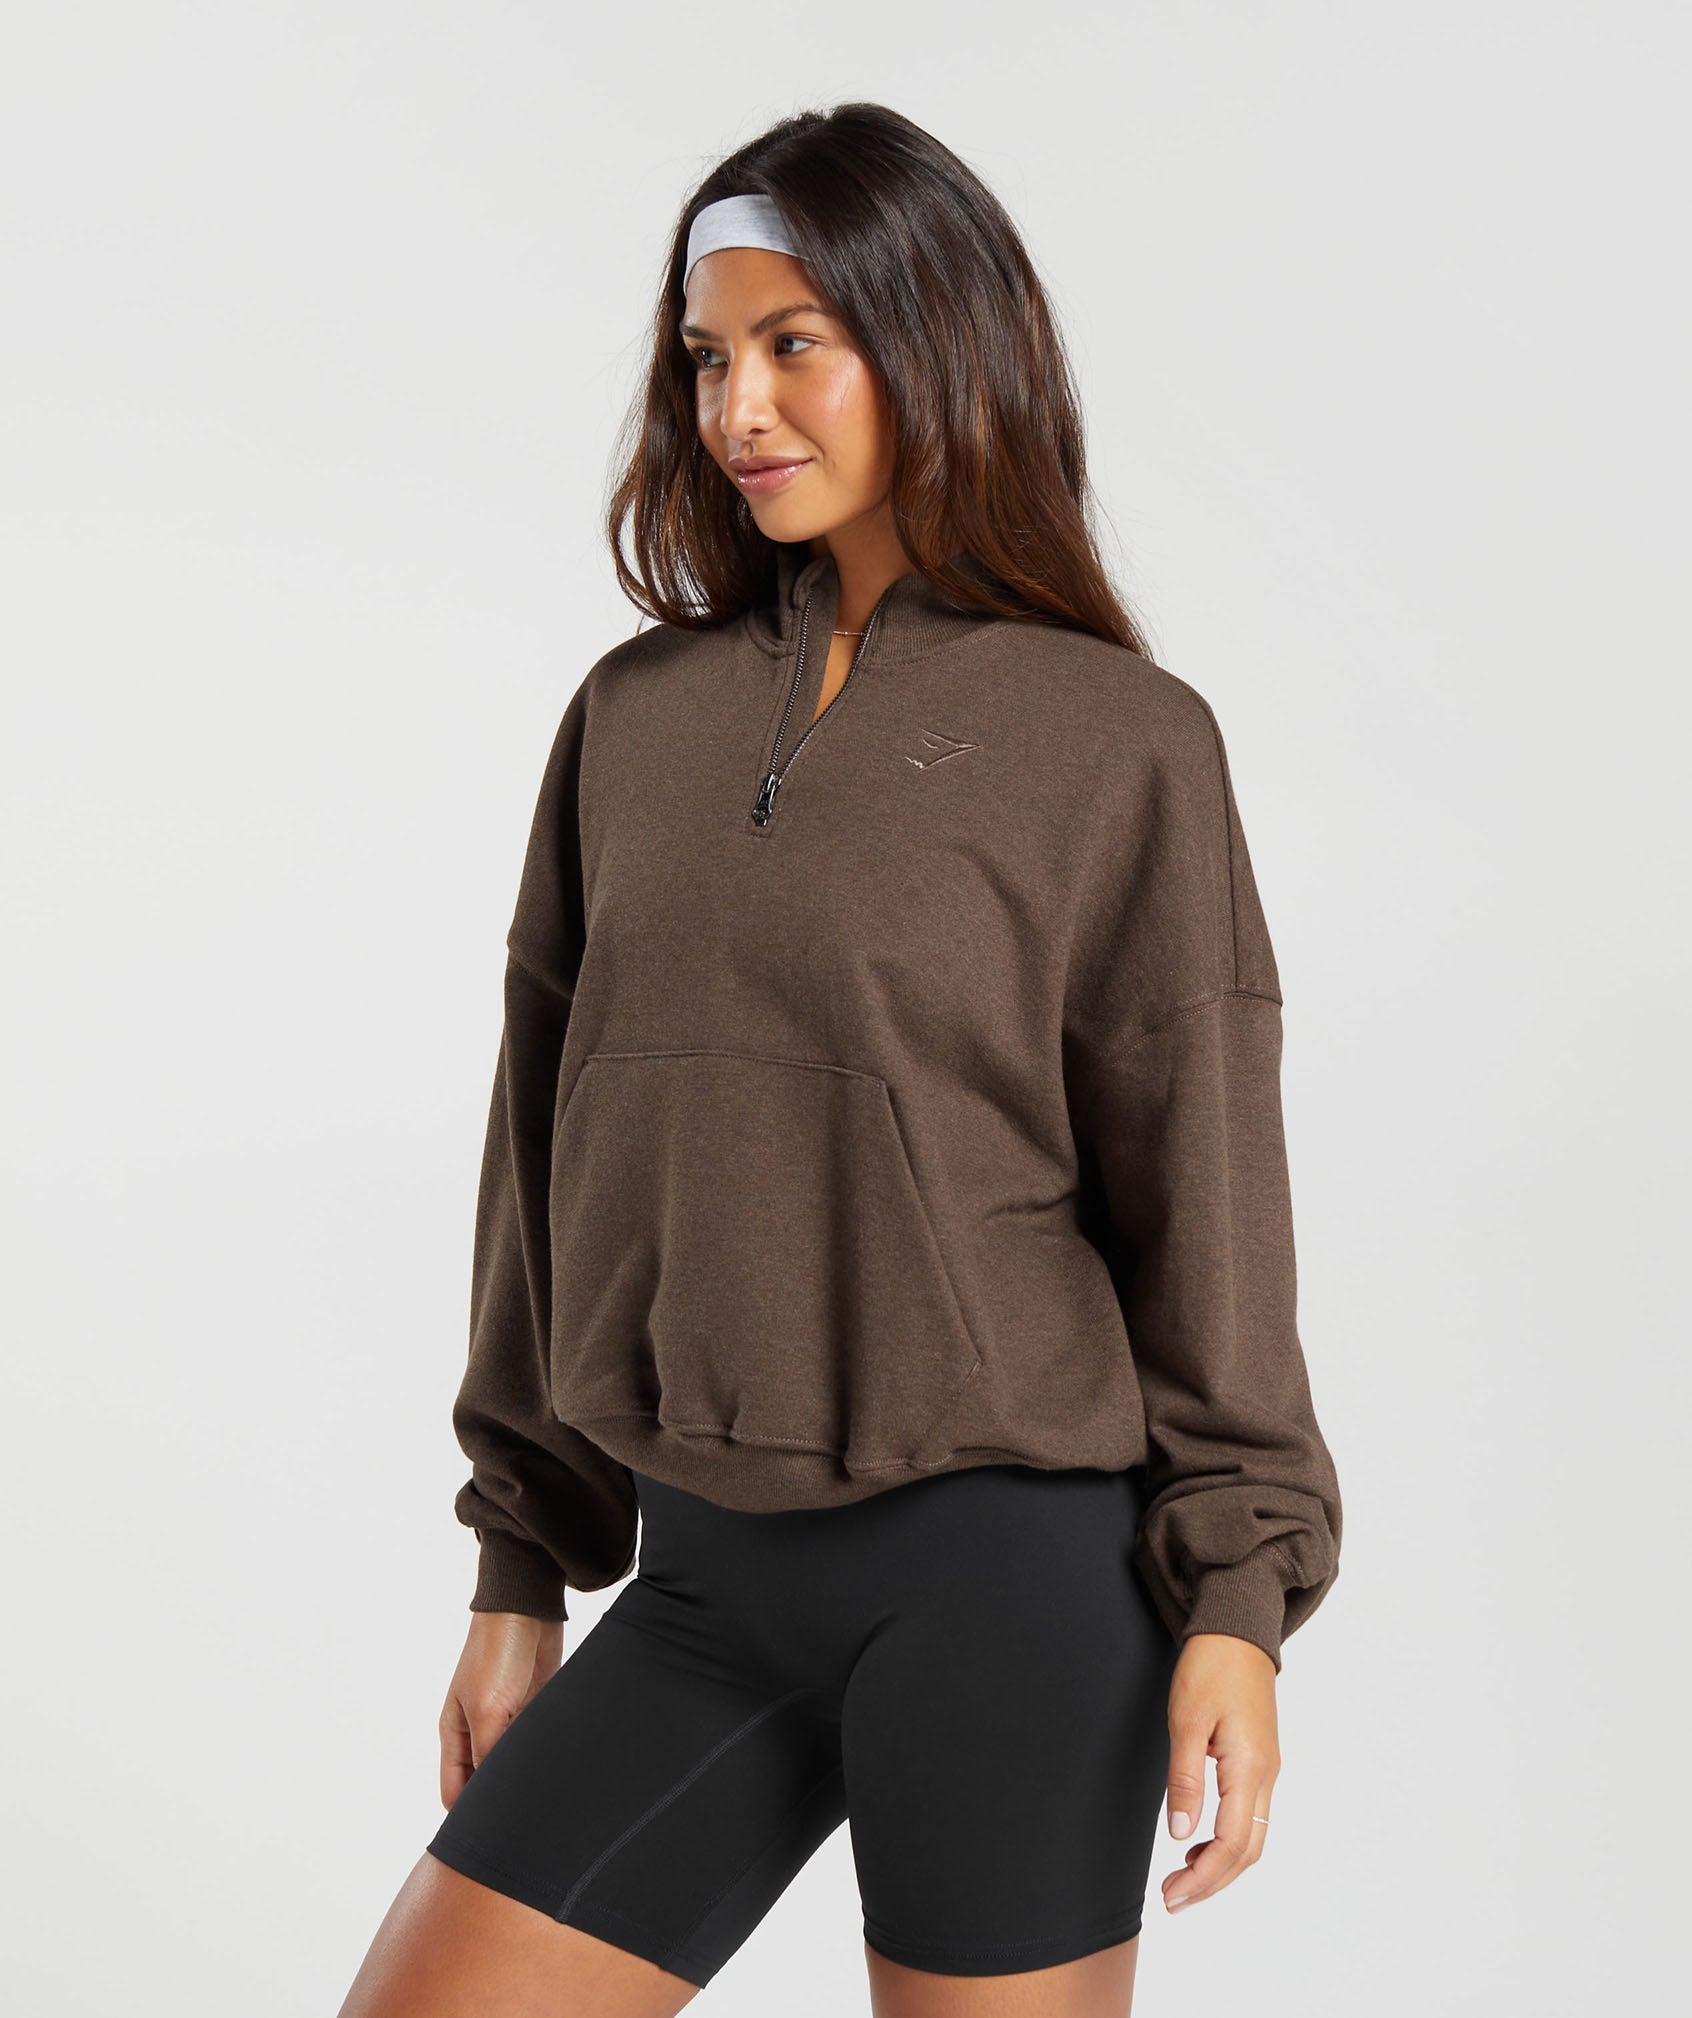 Rest Day Sweats 1/2 Zip Pullover in Cozy Brown Marl - view 3